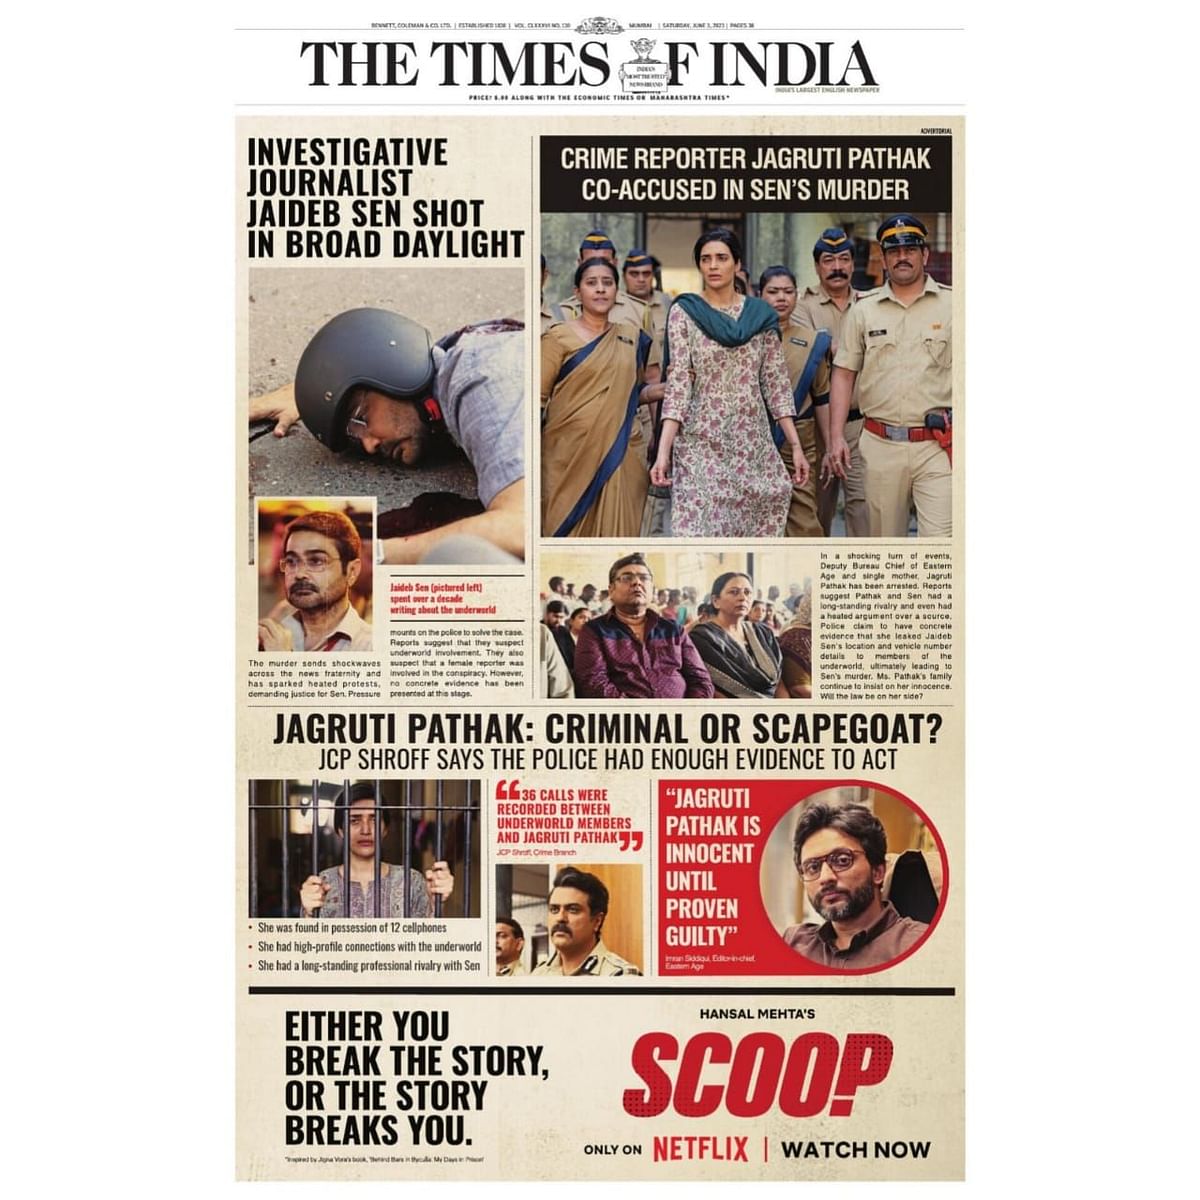 Netflix takes over The Times of India front page to promote new drama series